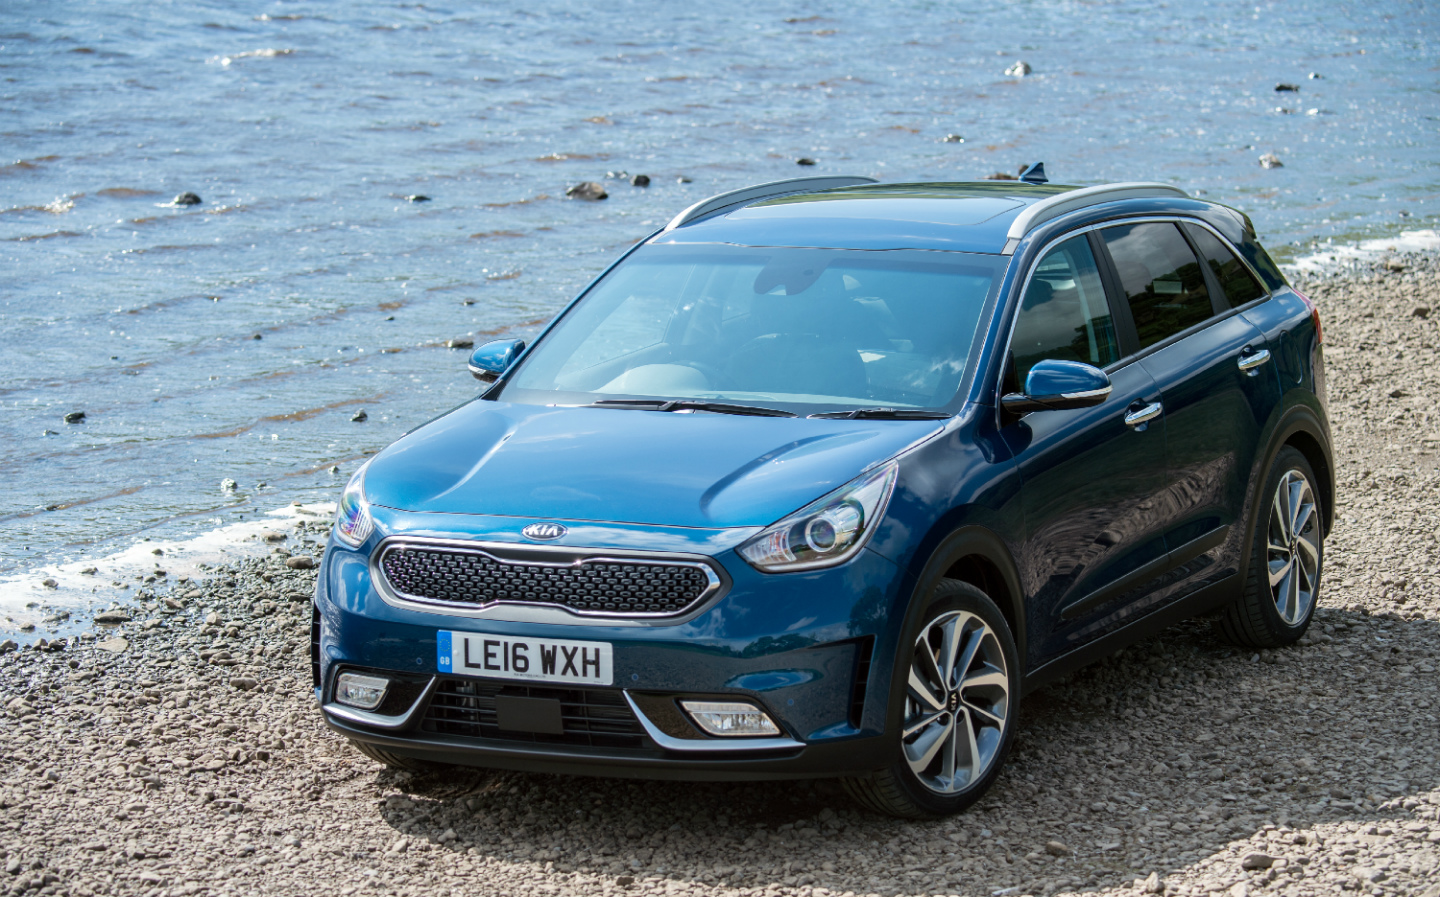 2017 Kia Niro Long-Term Verdict: Recommendable After One Year?